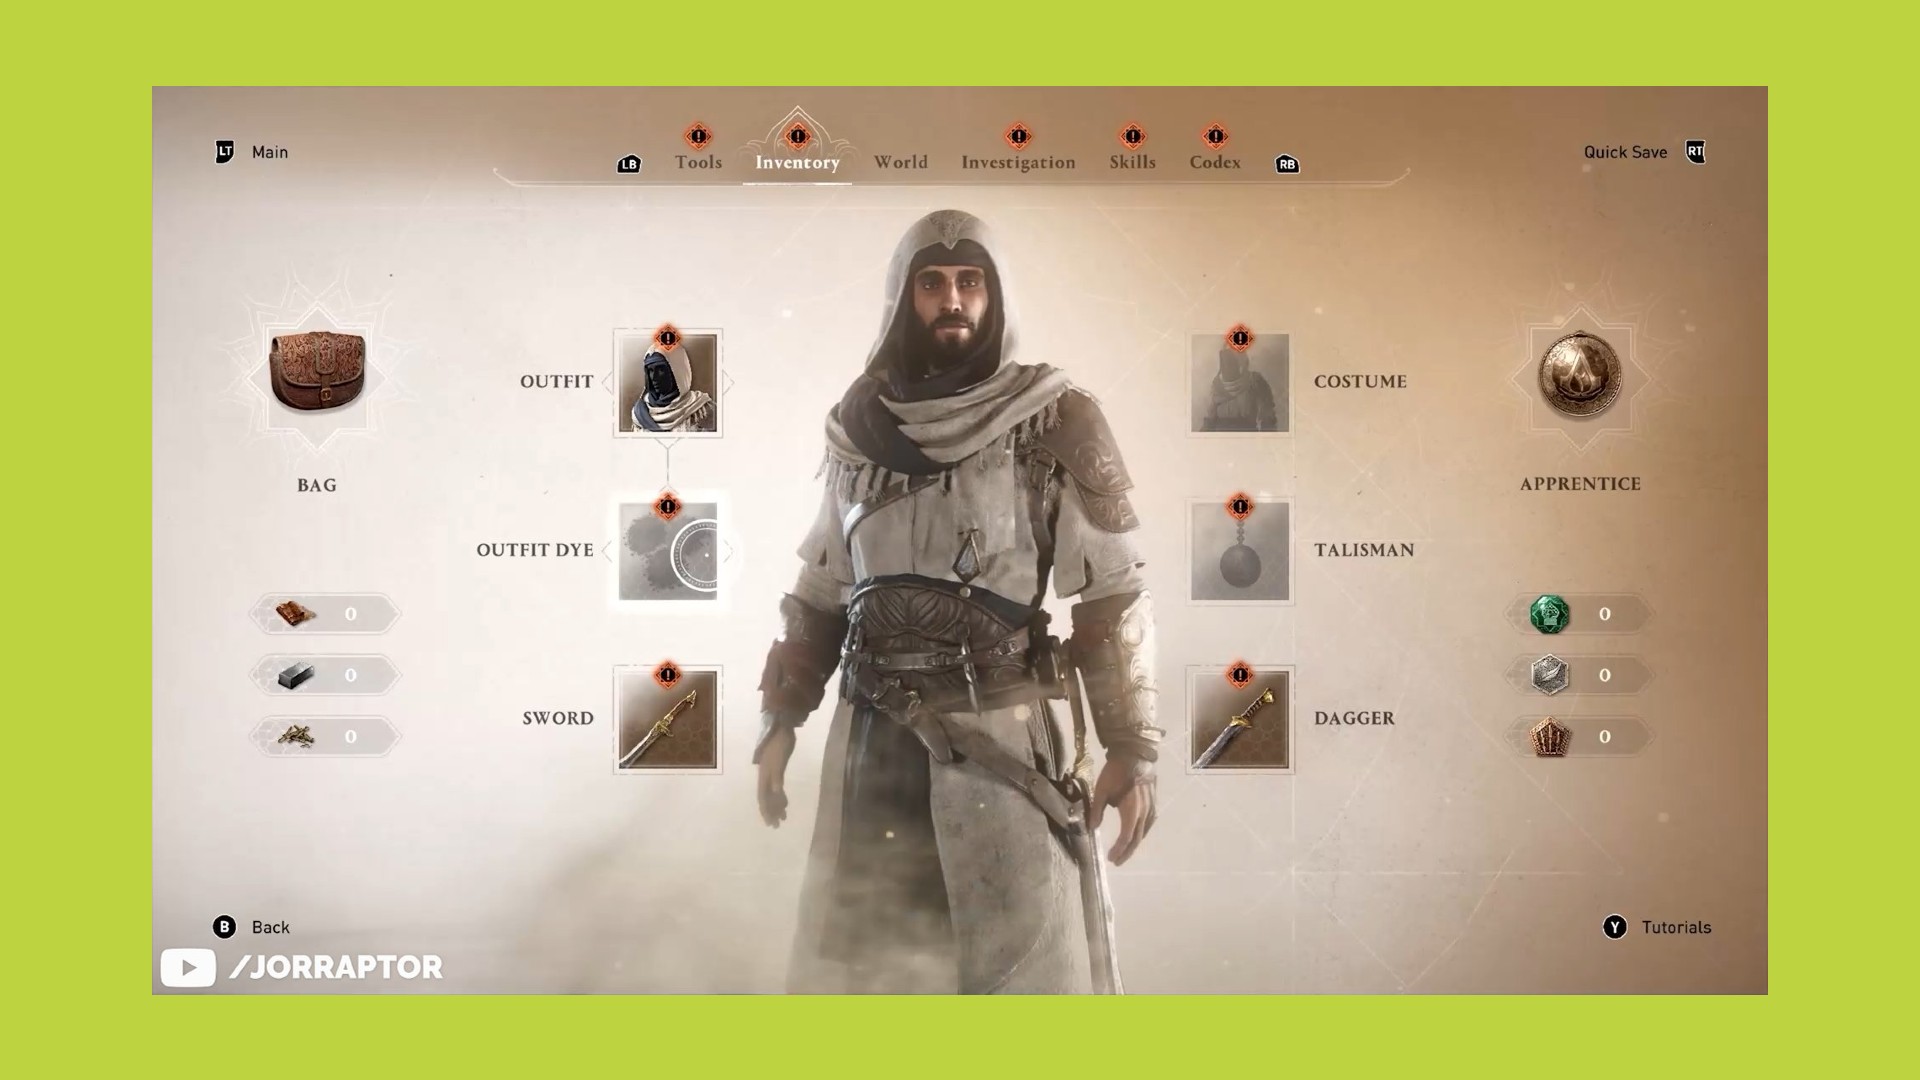 How To Get More Tokens In Assassin's Creed Mirage - GameSpot